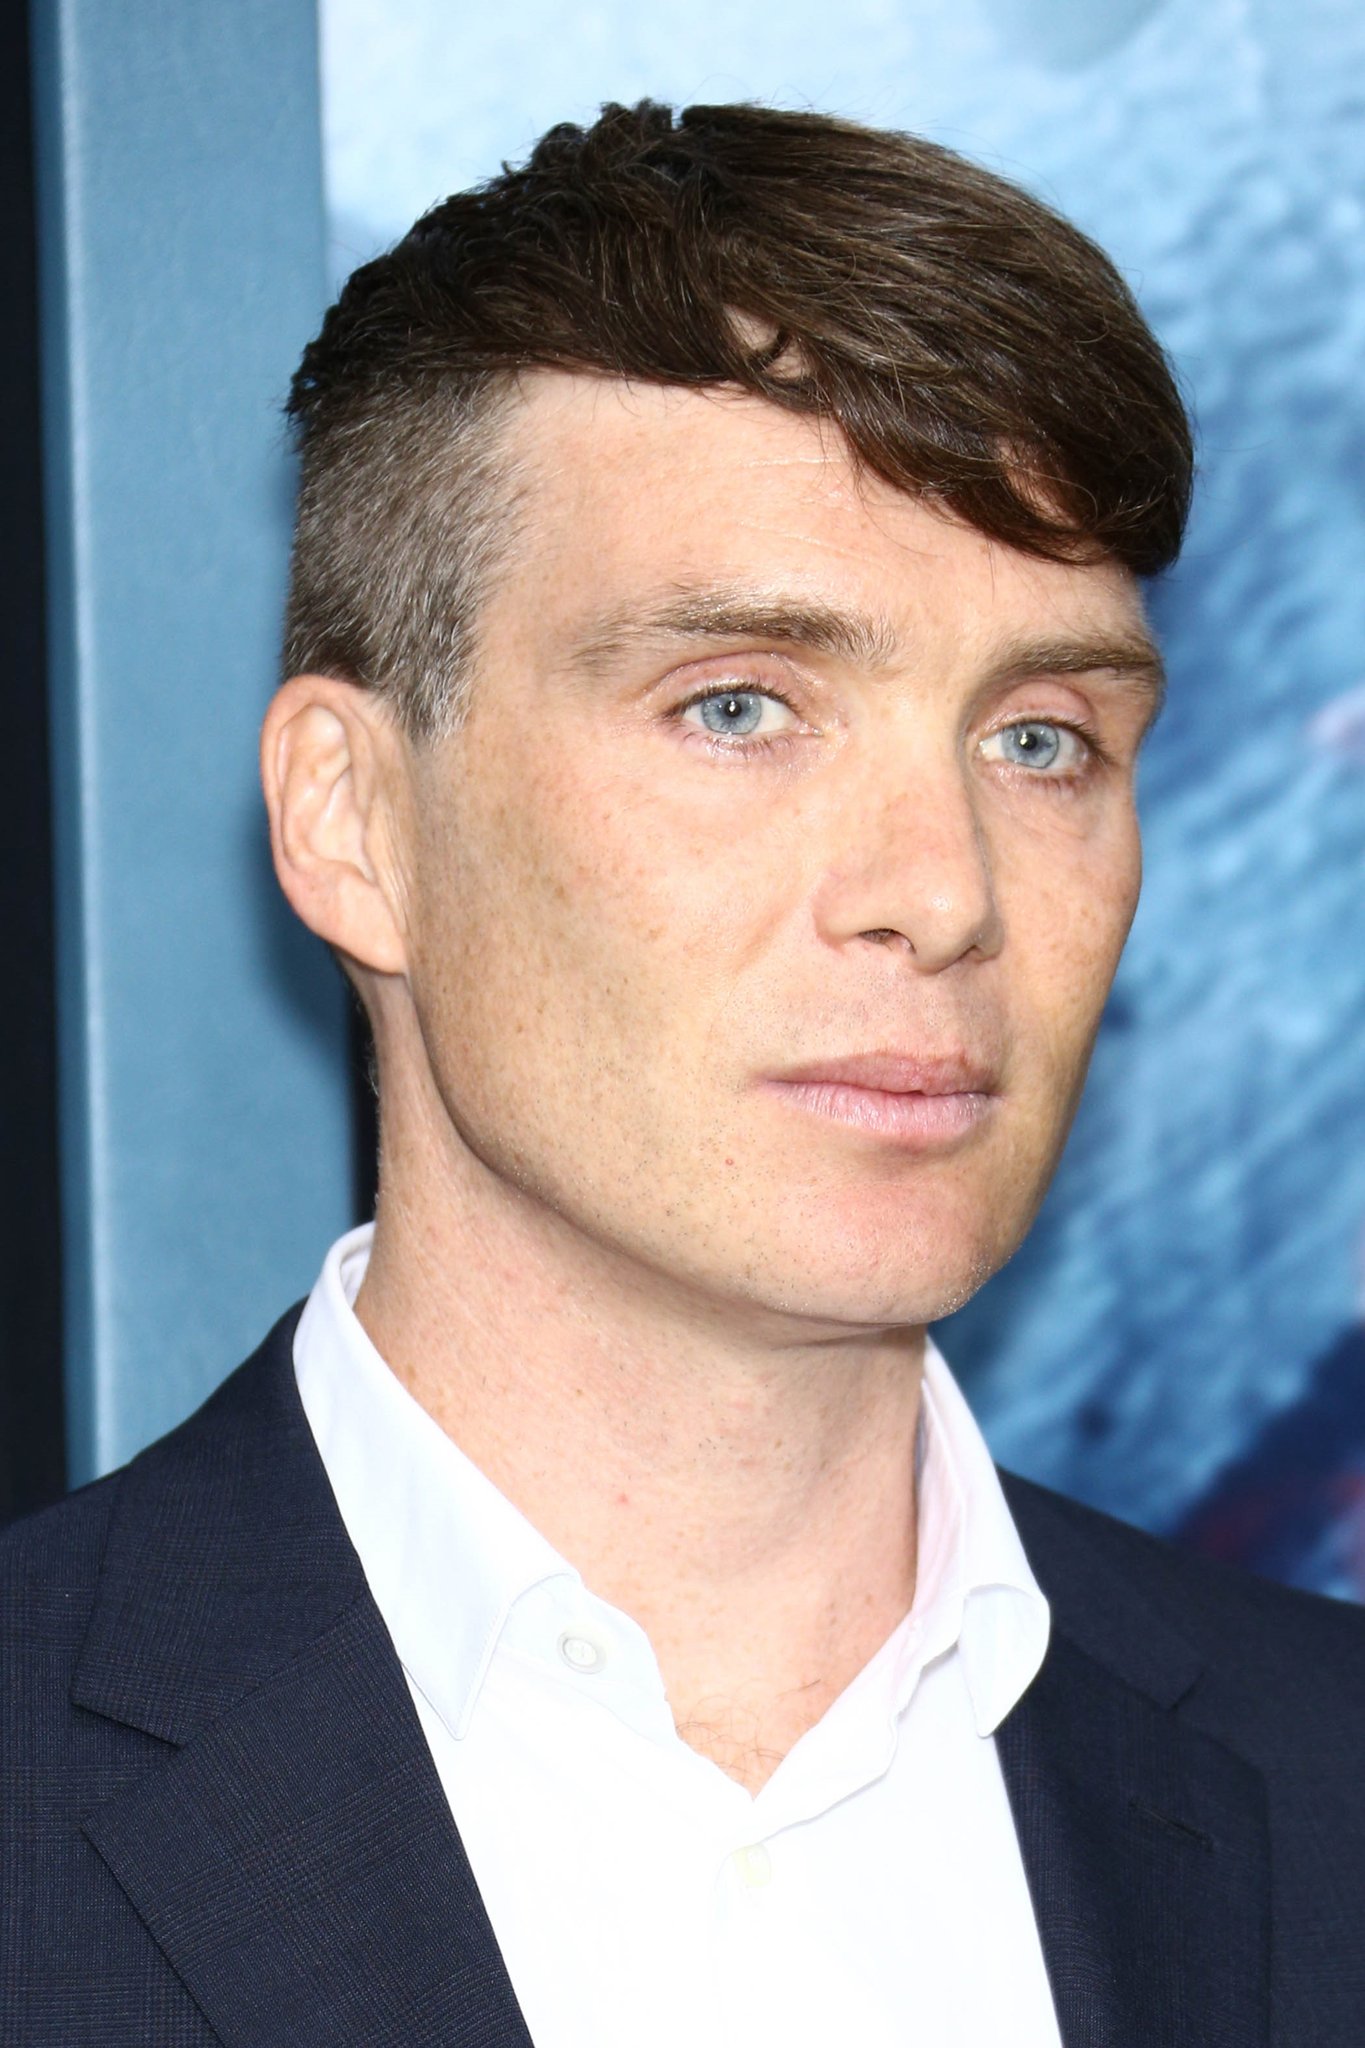 Peaky Blinders actor Cillian Murphy reveals he can only take bus  unmolested if he wears his hair long  The Irish Sun  The Irish Sun